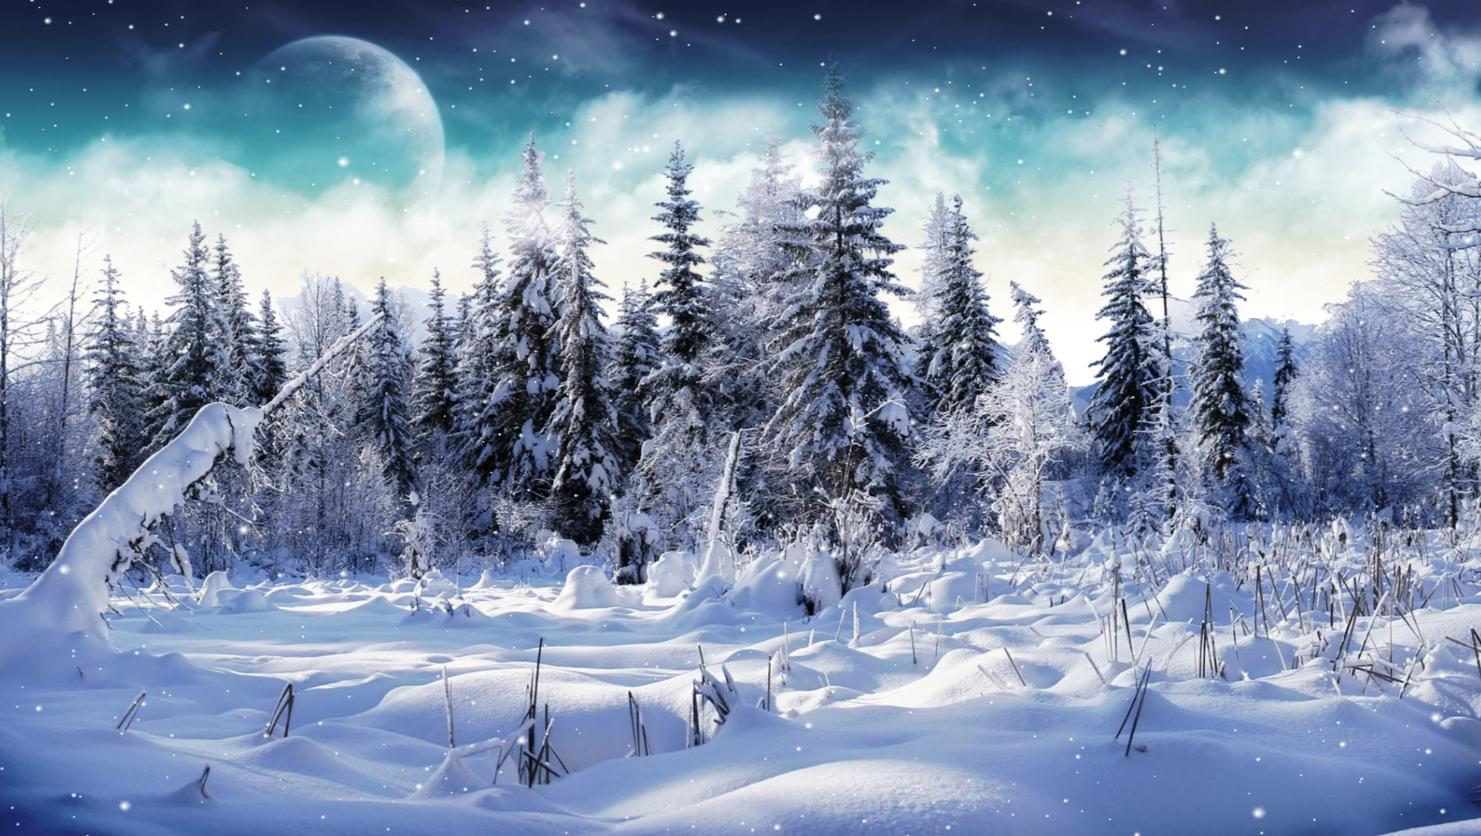  and Enjoy this FREE Cold Winter Screensaver   Animated Wallpaper